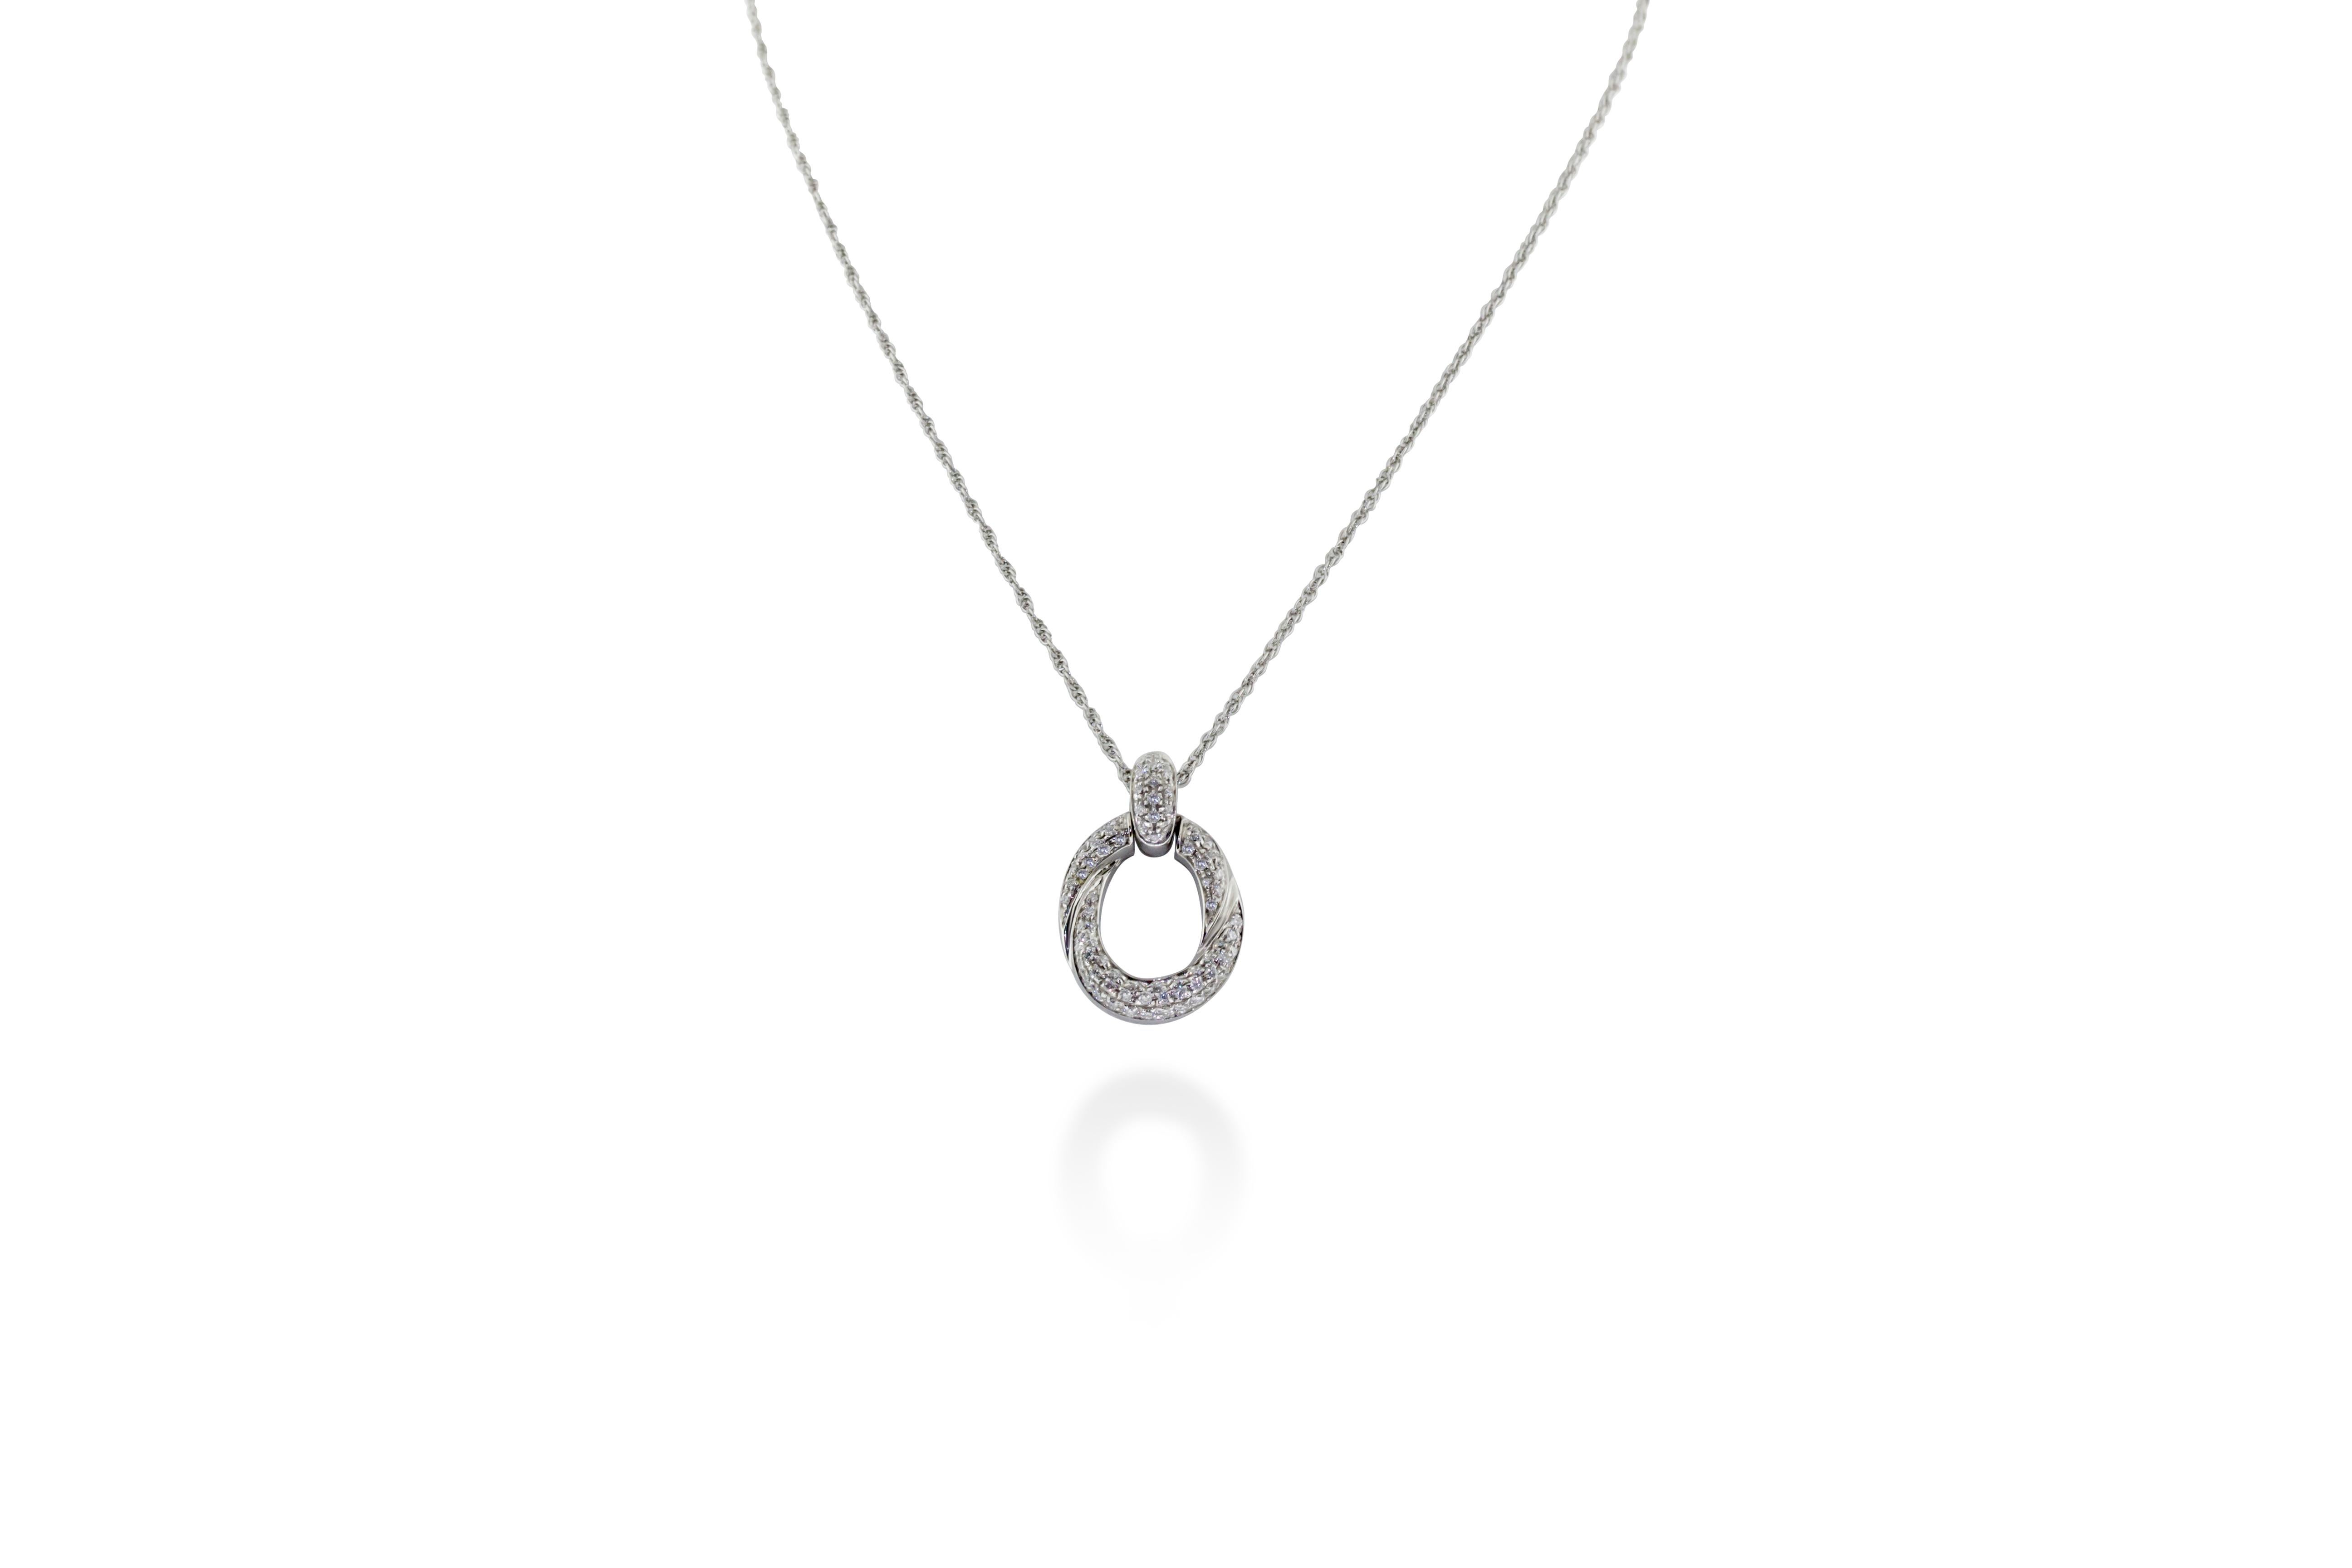 This necklace features an oval shape 18K white gold pendant encrusted in 0.55 carats of G-H VS diamonds. 6 grams of gold. Chain length is approximately 9 inches. Made in Italy. 